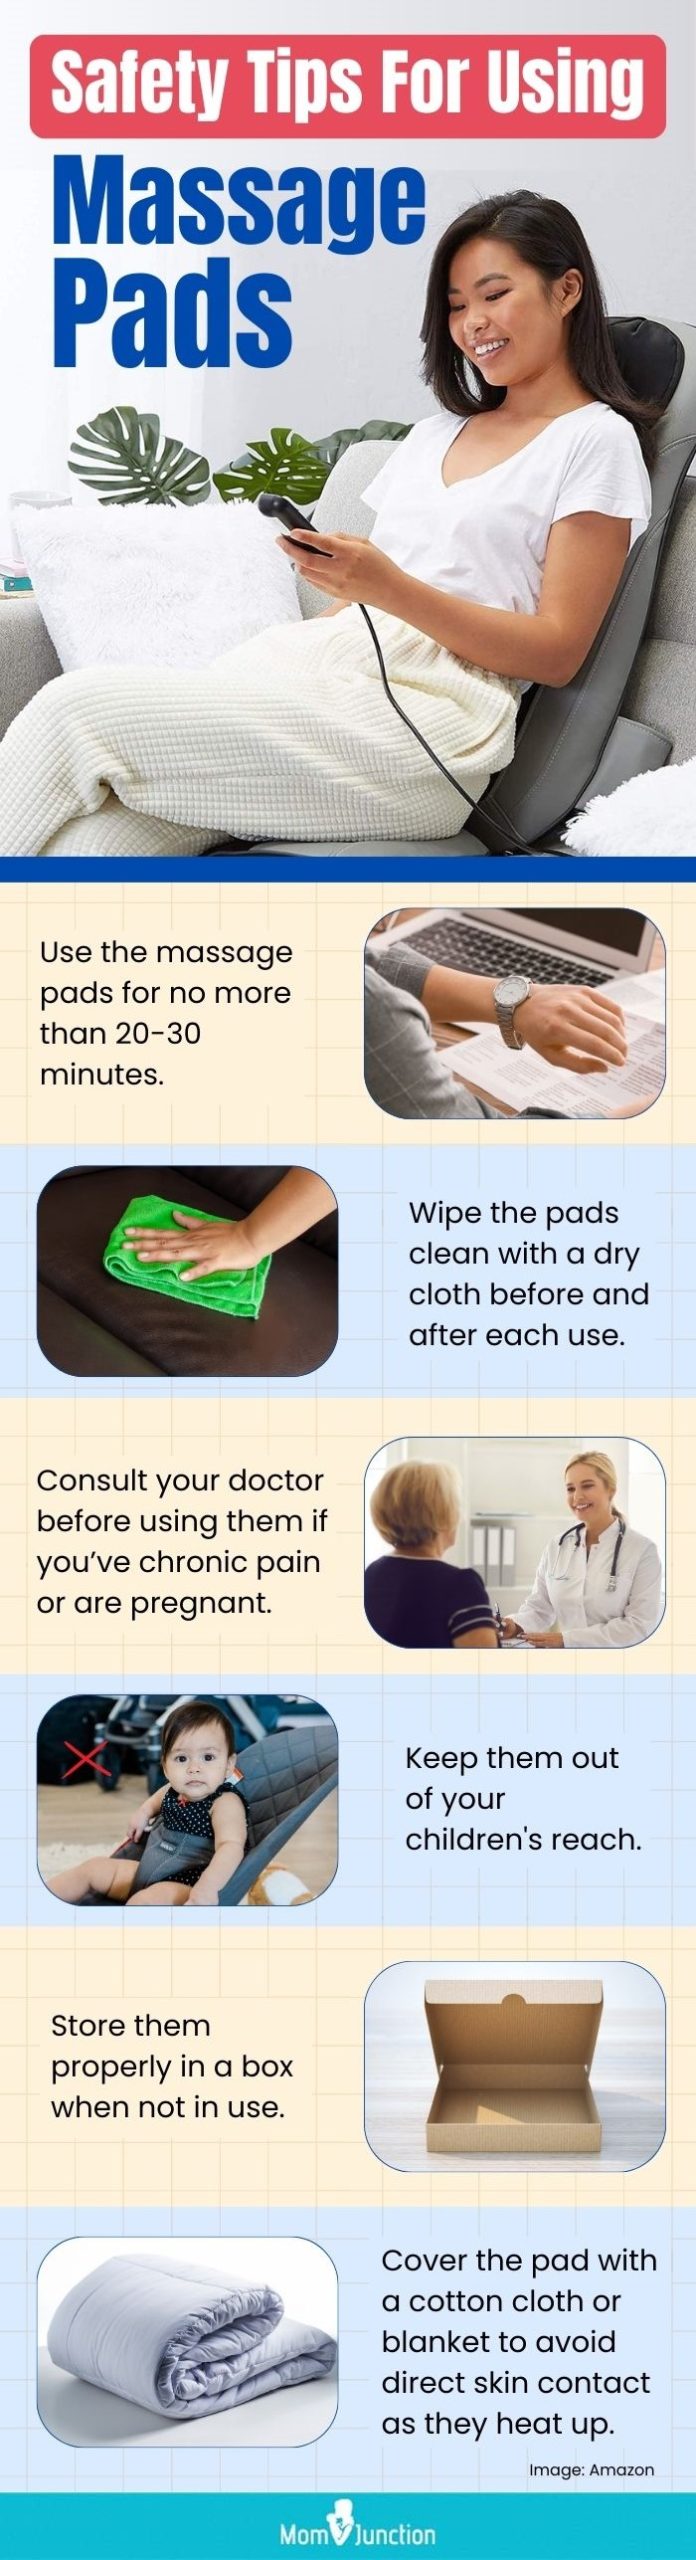 https://www.momjunction.com/wp-content/uploads/2020/06/Safety-Tips-For-Using-Massage-Pads-scaled.jpg